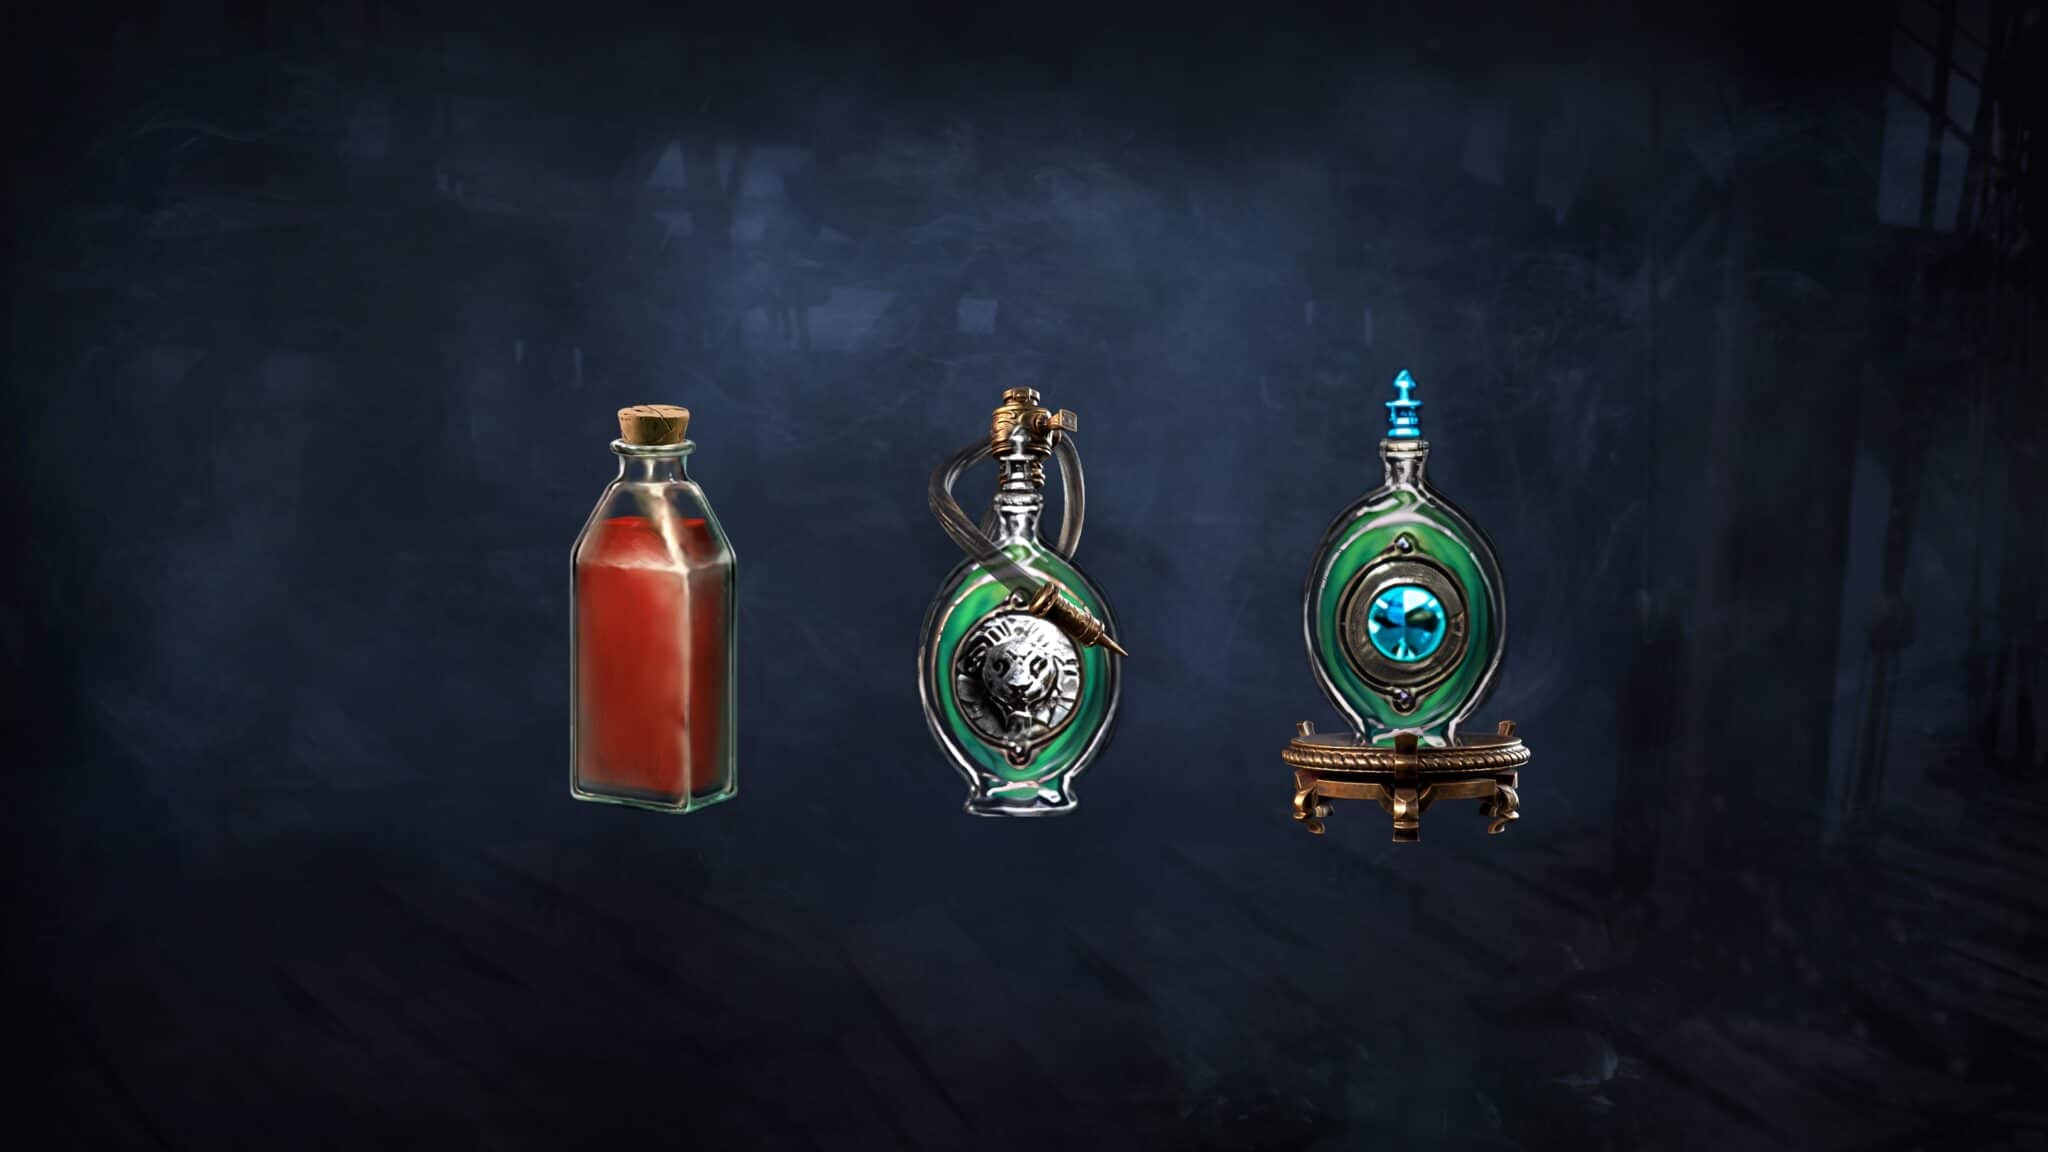 The current state of the flasks was a thorn in the developers' side.